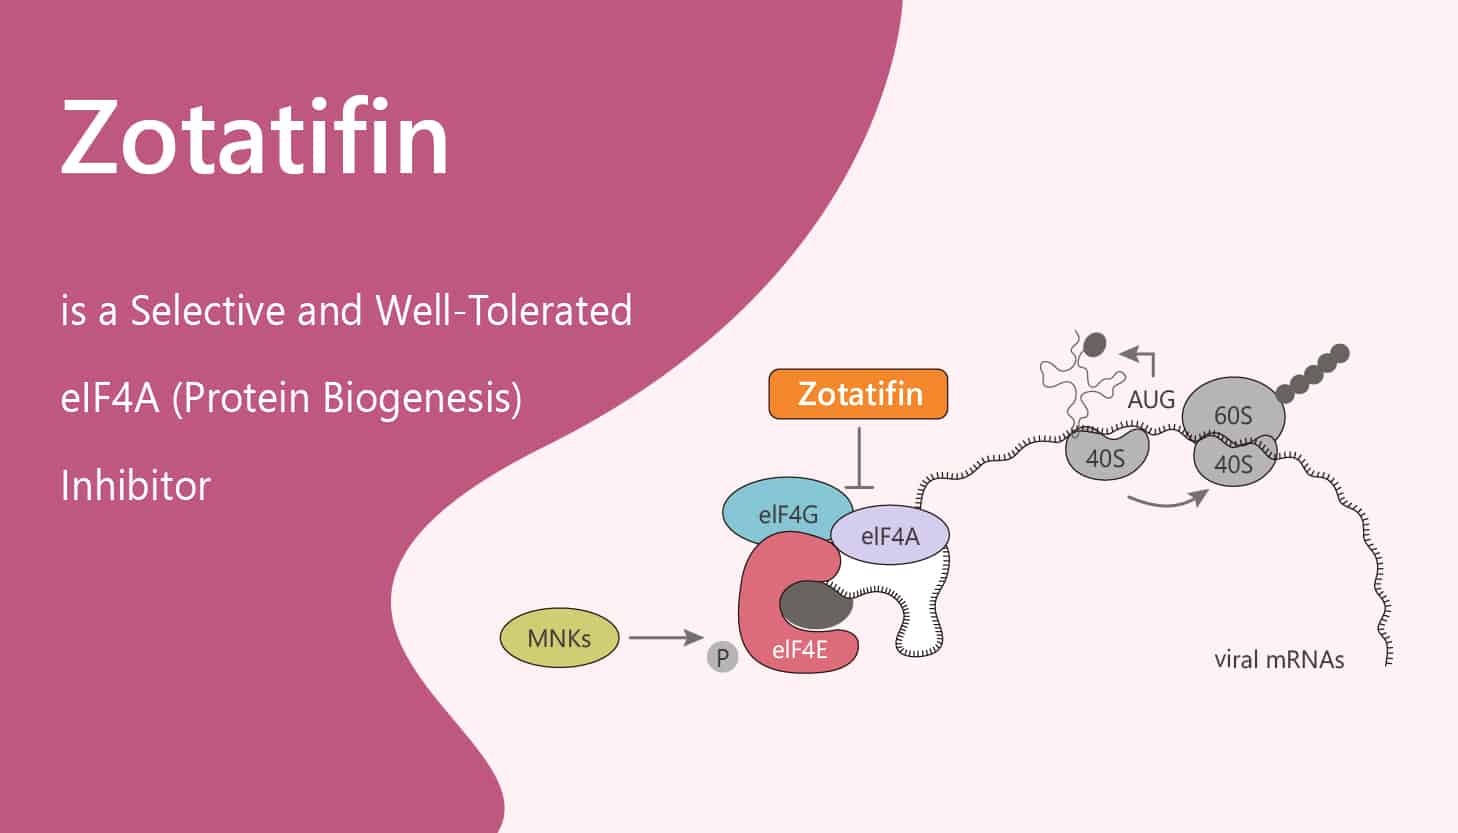 Zotatifin is a Selective and Well-Tolerated eIF4A (Protein Biogenesis) Inhibitor